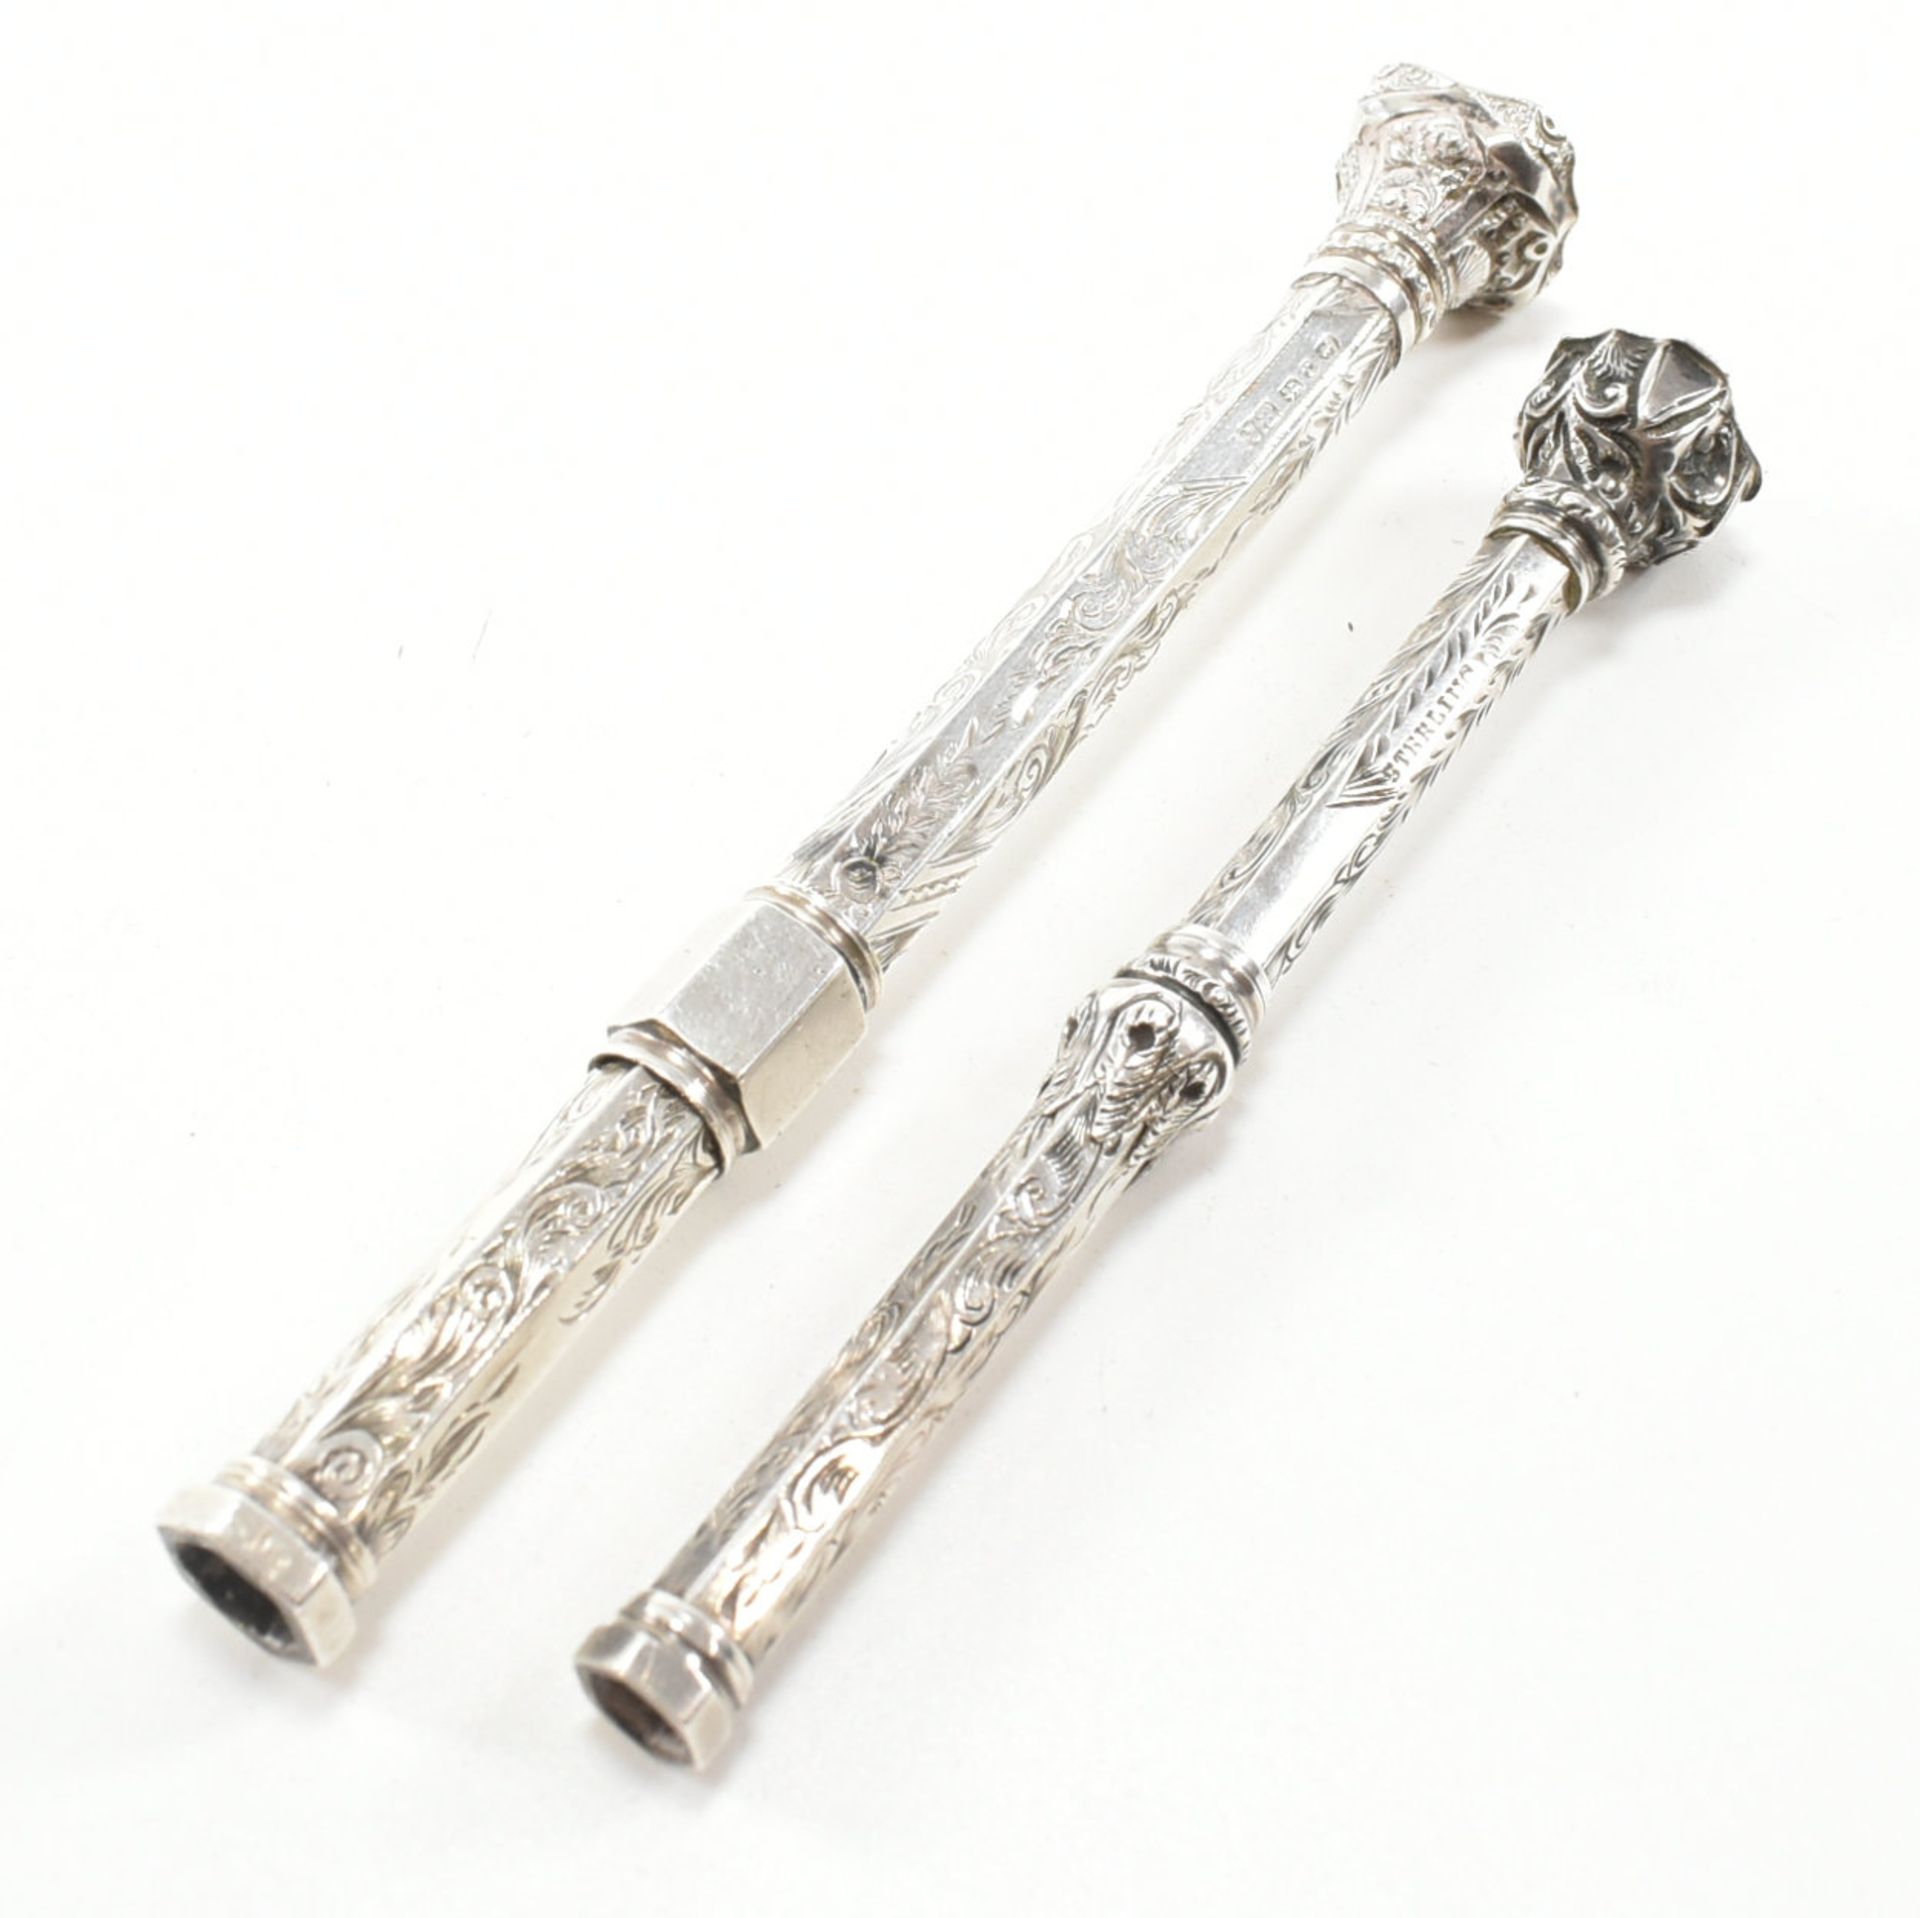 TWO SILVER PROPELLING PENCILS WITH BLOODSTONE SEALS - Image 10 of 10